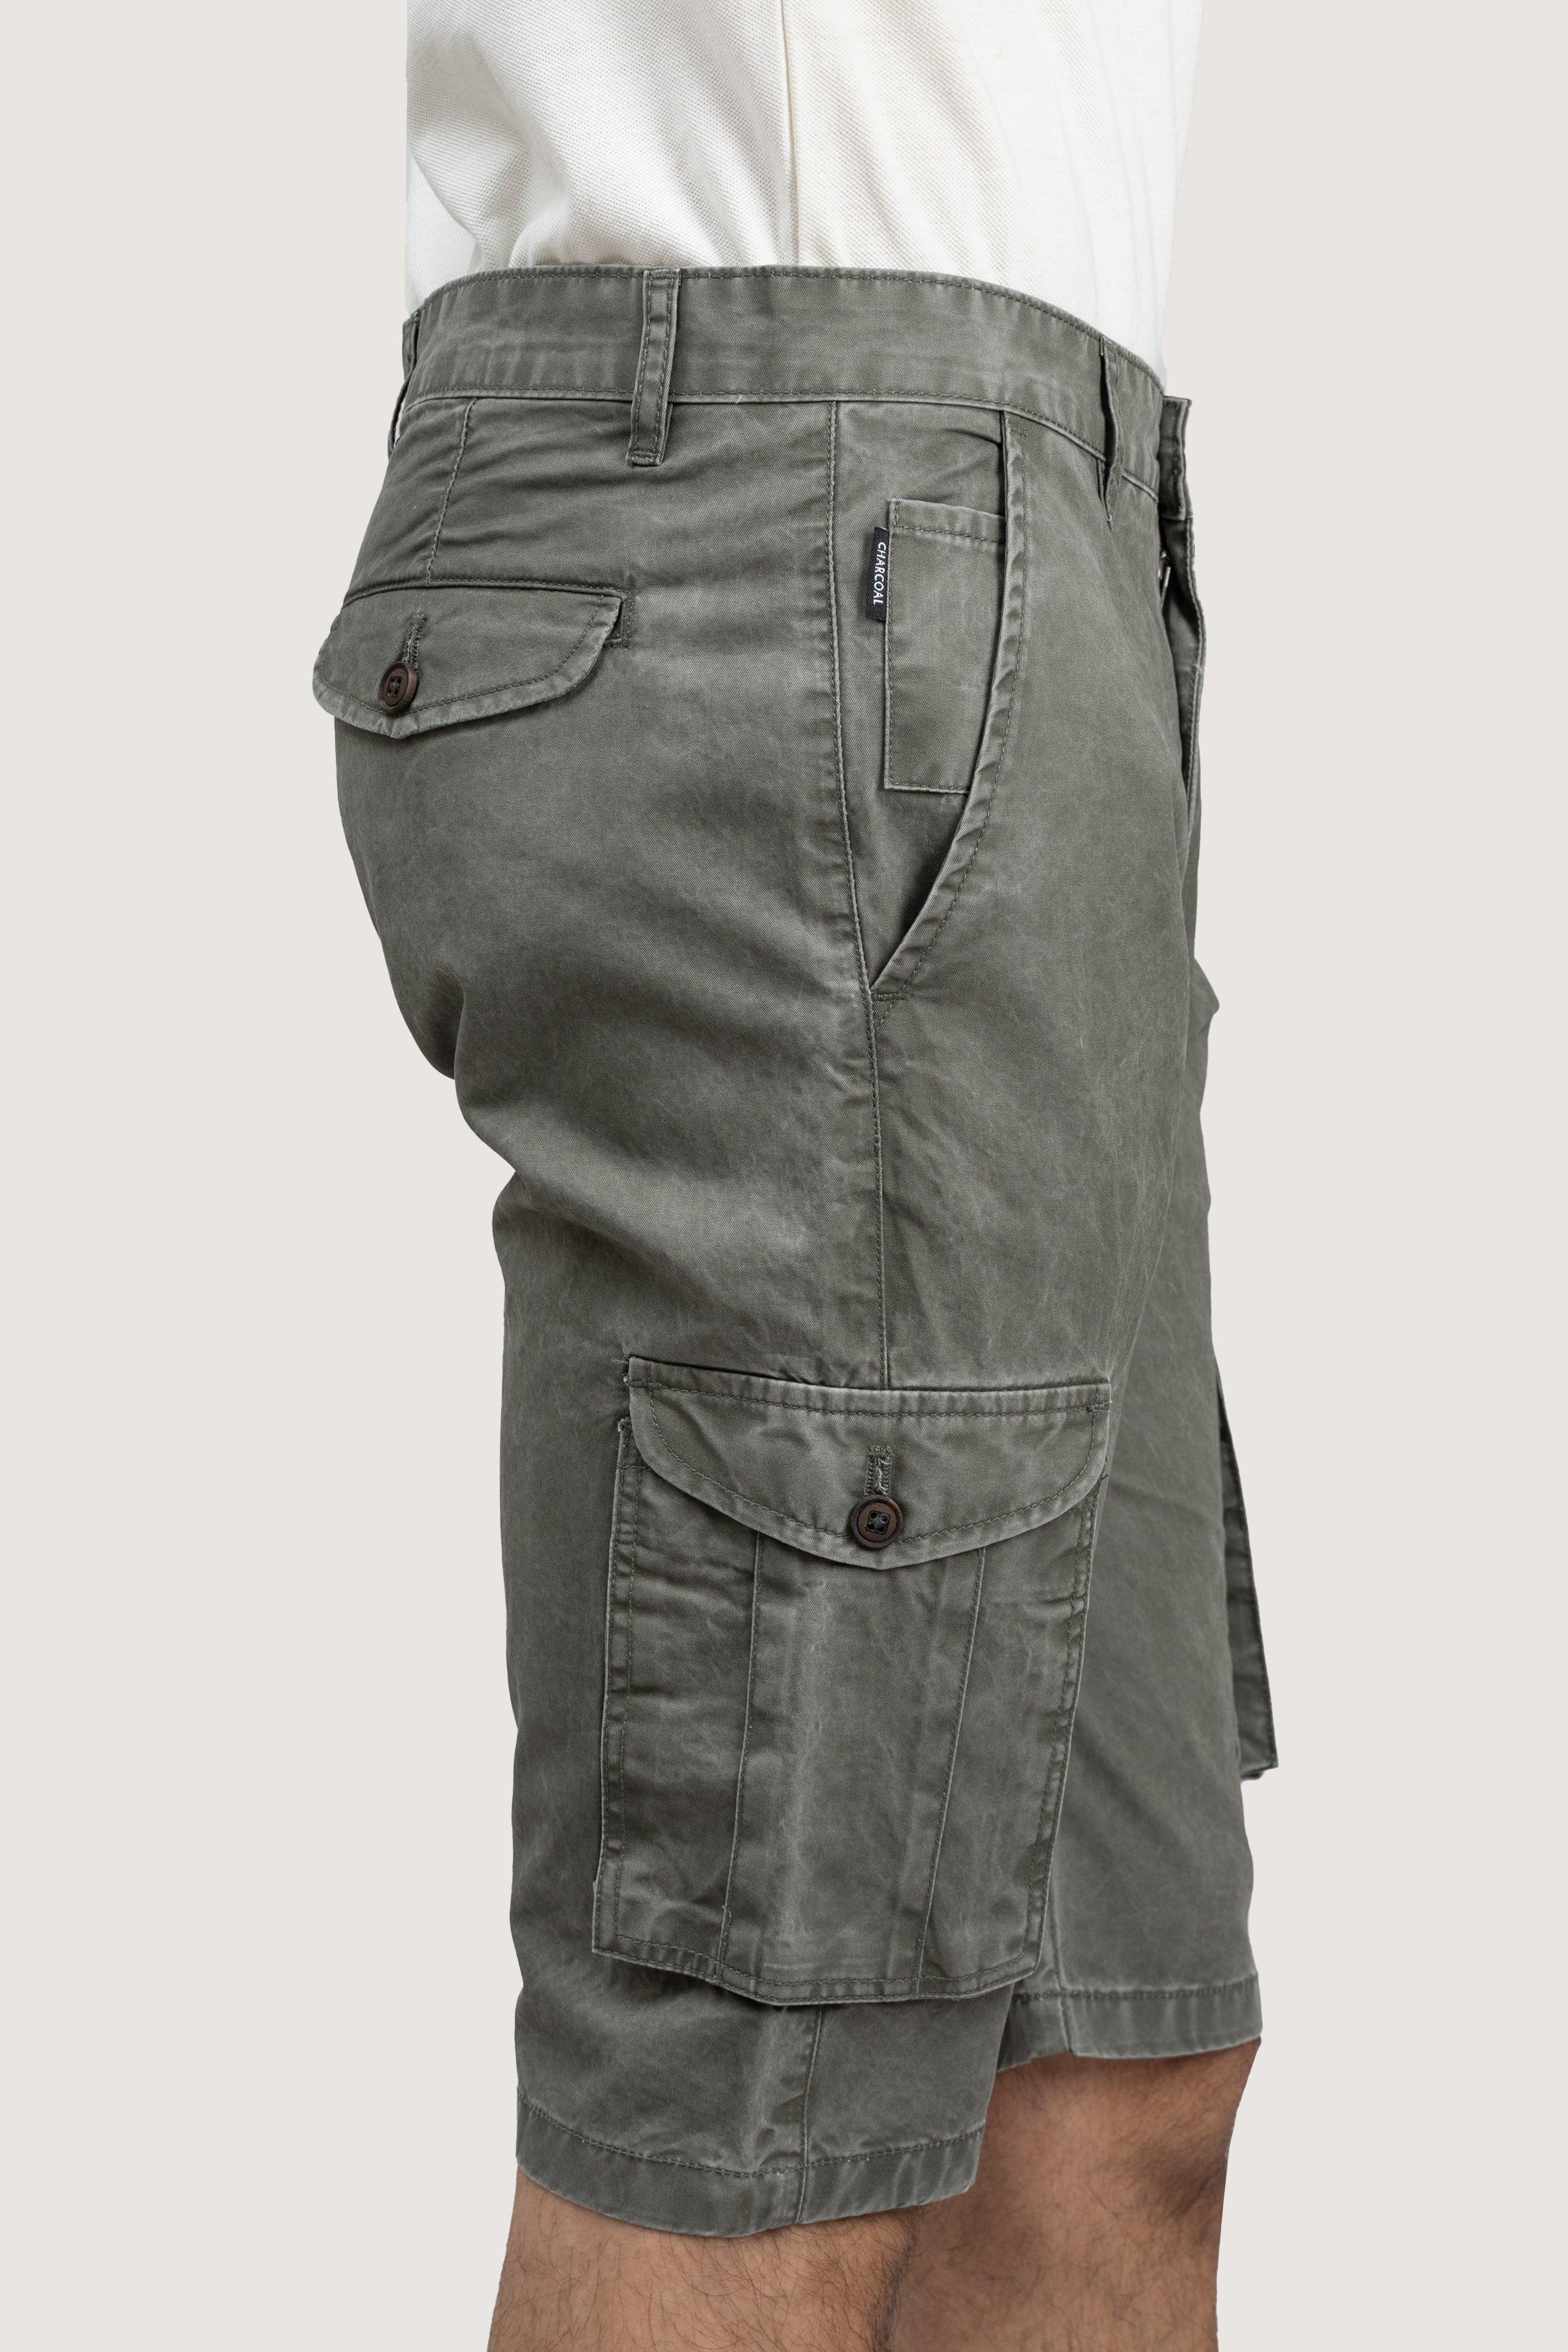 CARGO ENZYME WASHED REGULAR FIT OLIVE SHORTS at Charcoal Clothing